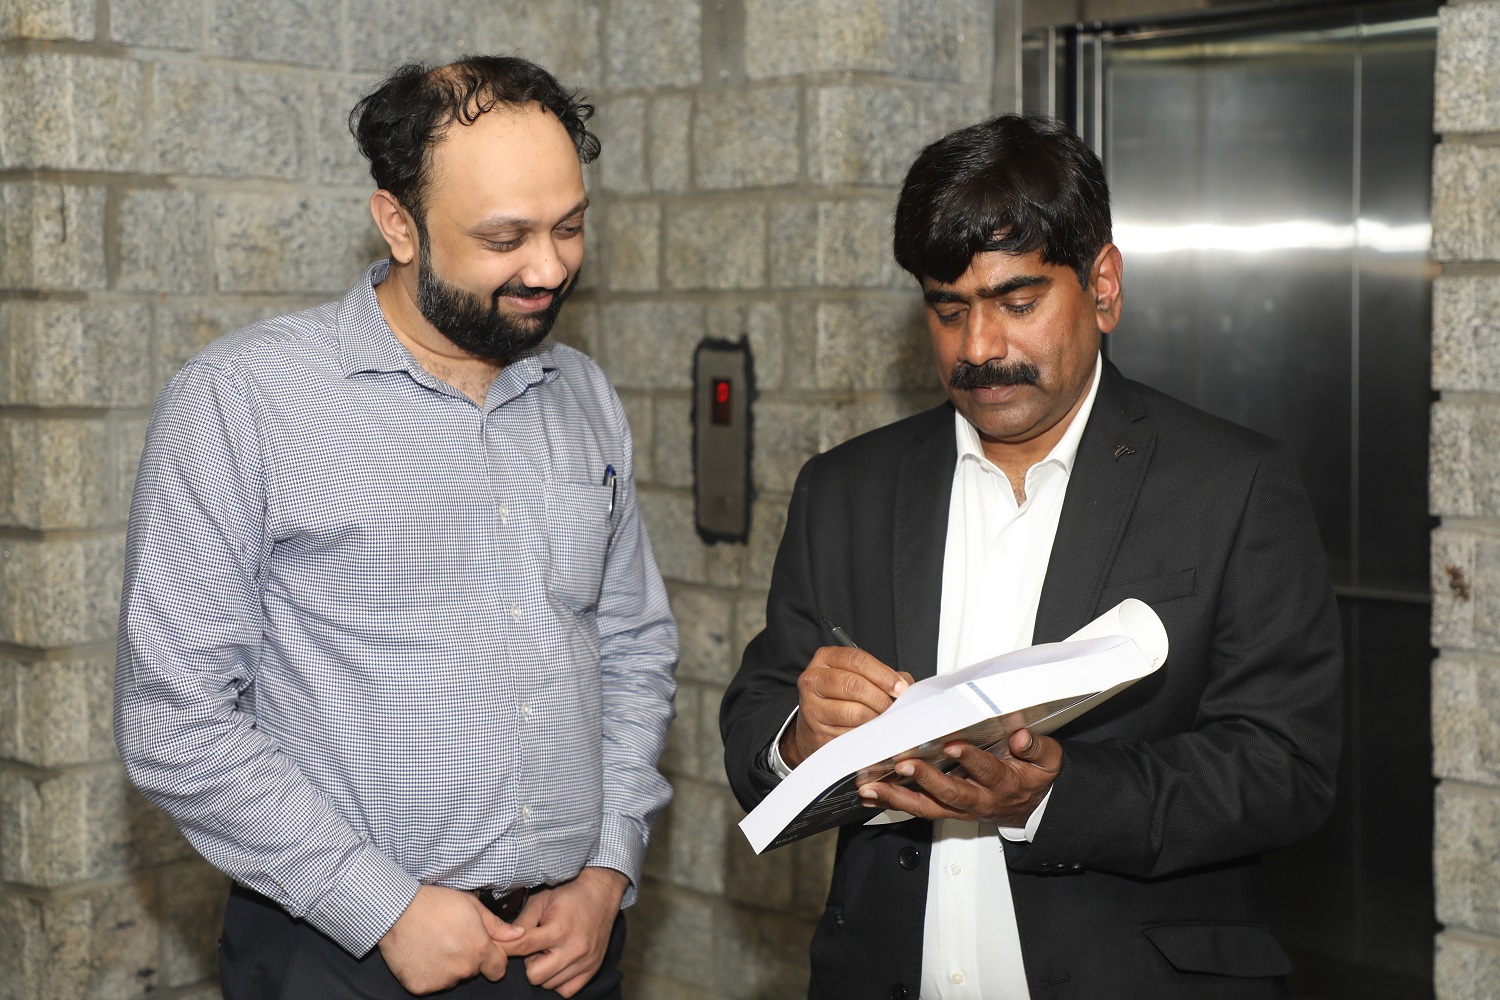 Prof. U Dinesh Kumar, Co-Author, Machine Learning Using R’ and  ‘Data Visualization’ signs a copy of the book during the book launch event.